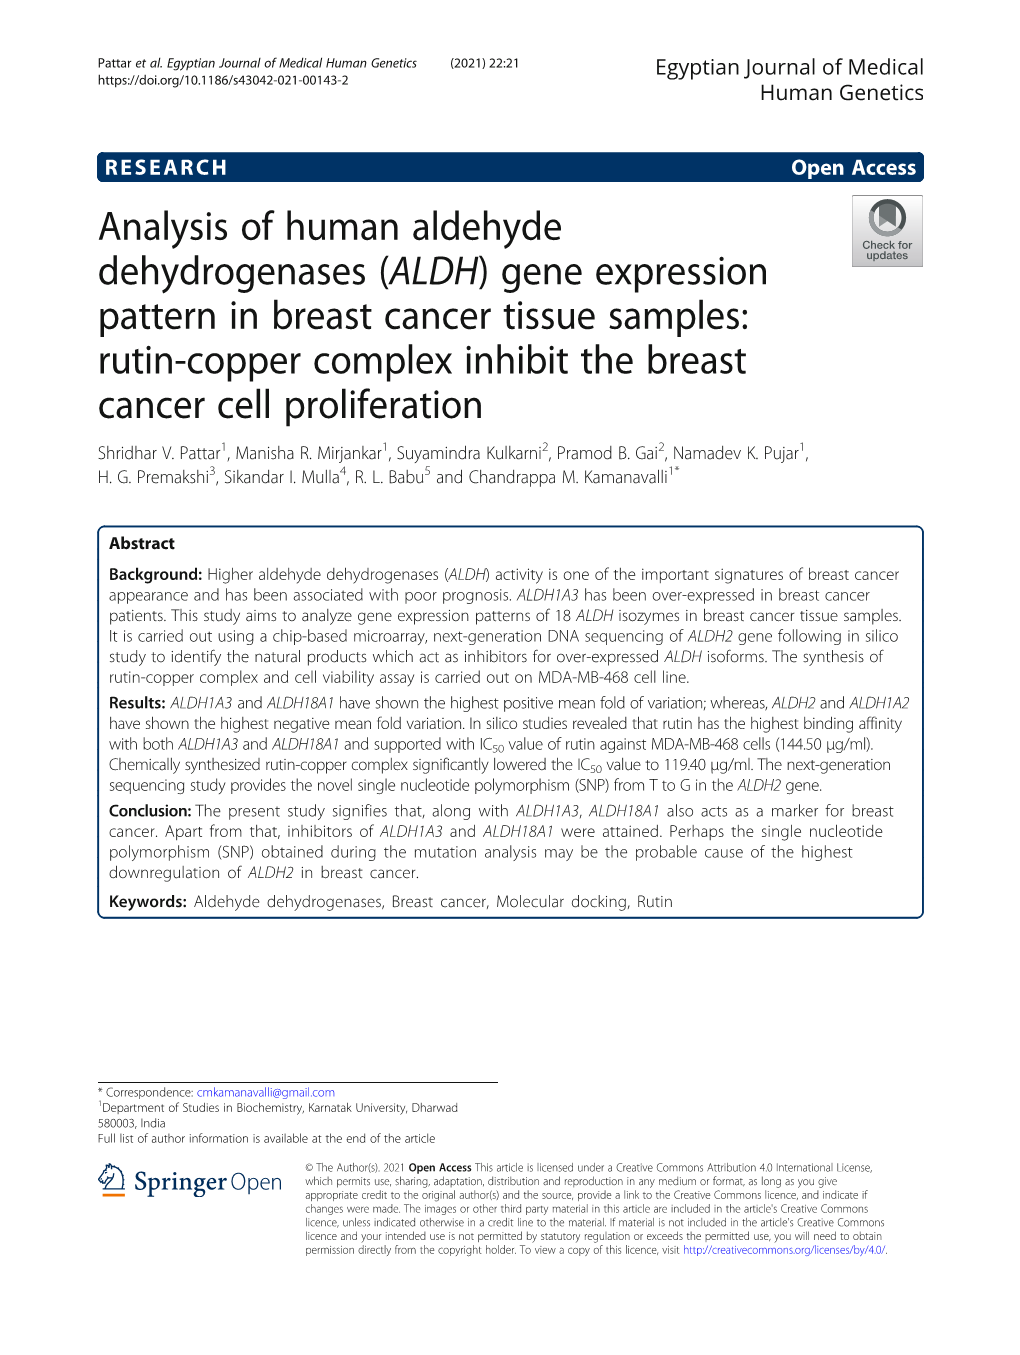 (ALDH) Gene Expression Pattern in Breast Cancer Tissue Samples: Rutin-Copper Complex Inhibit the Breast Cancer Cell Proliferation Shridhar V